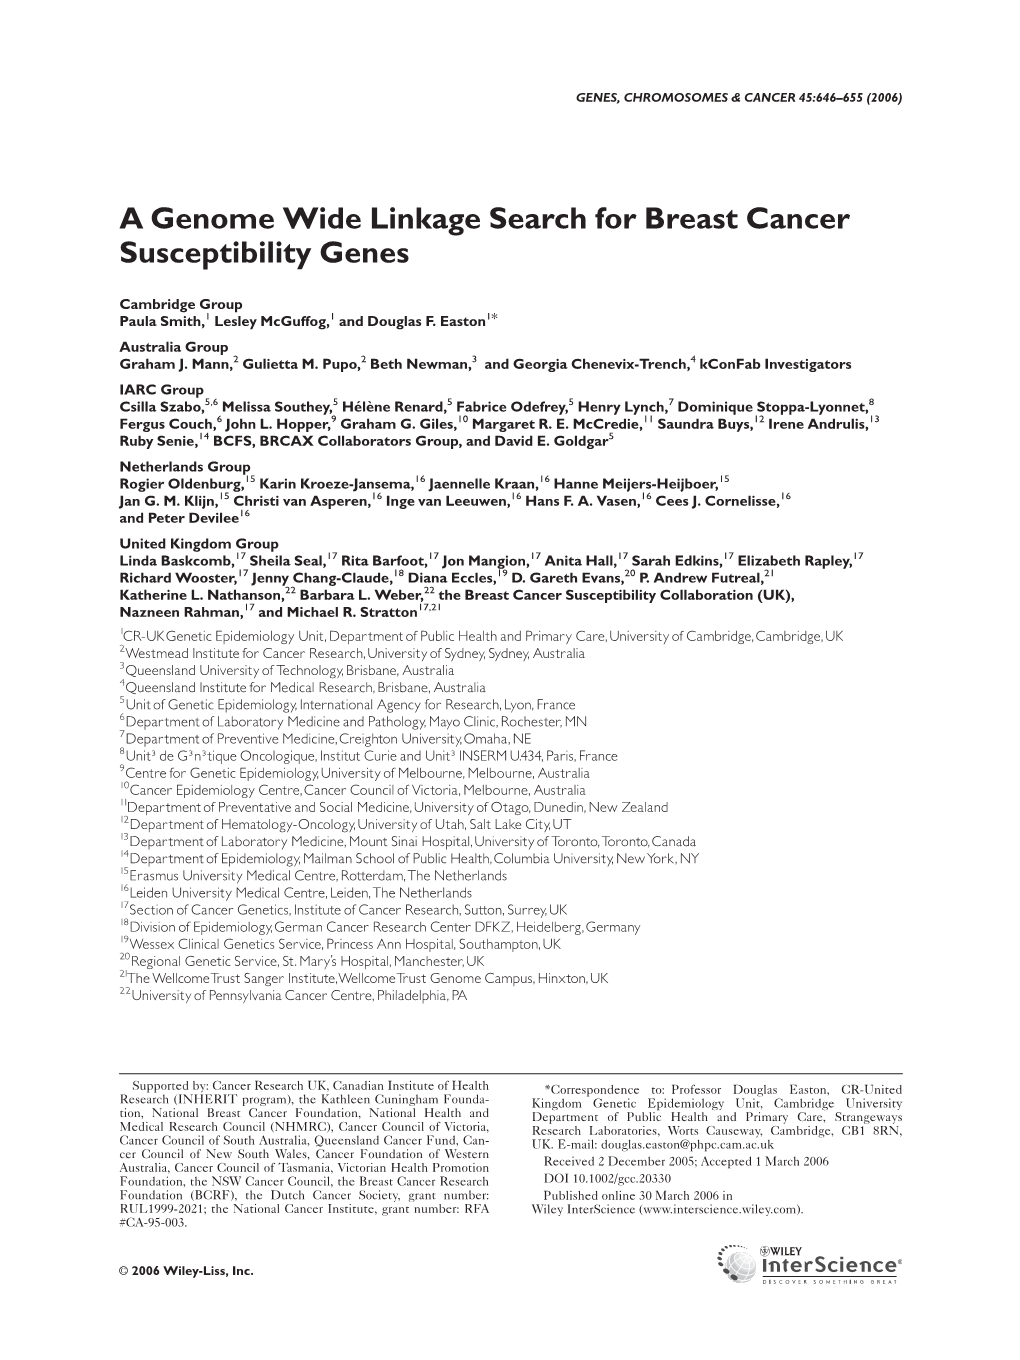 A Genome Wide Linkage Search for Breast Cancer Susceptibility Genes